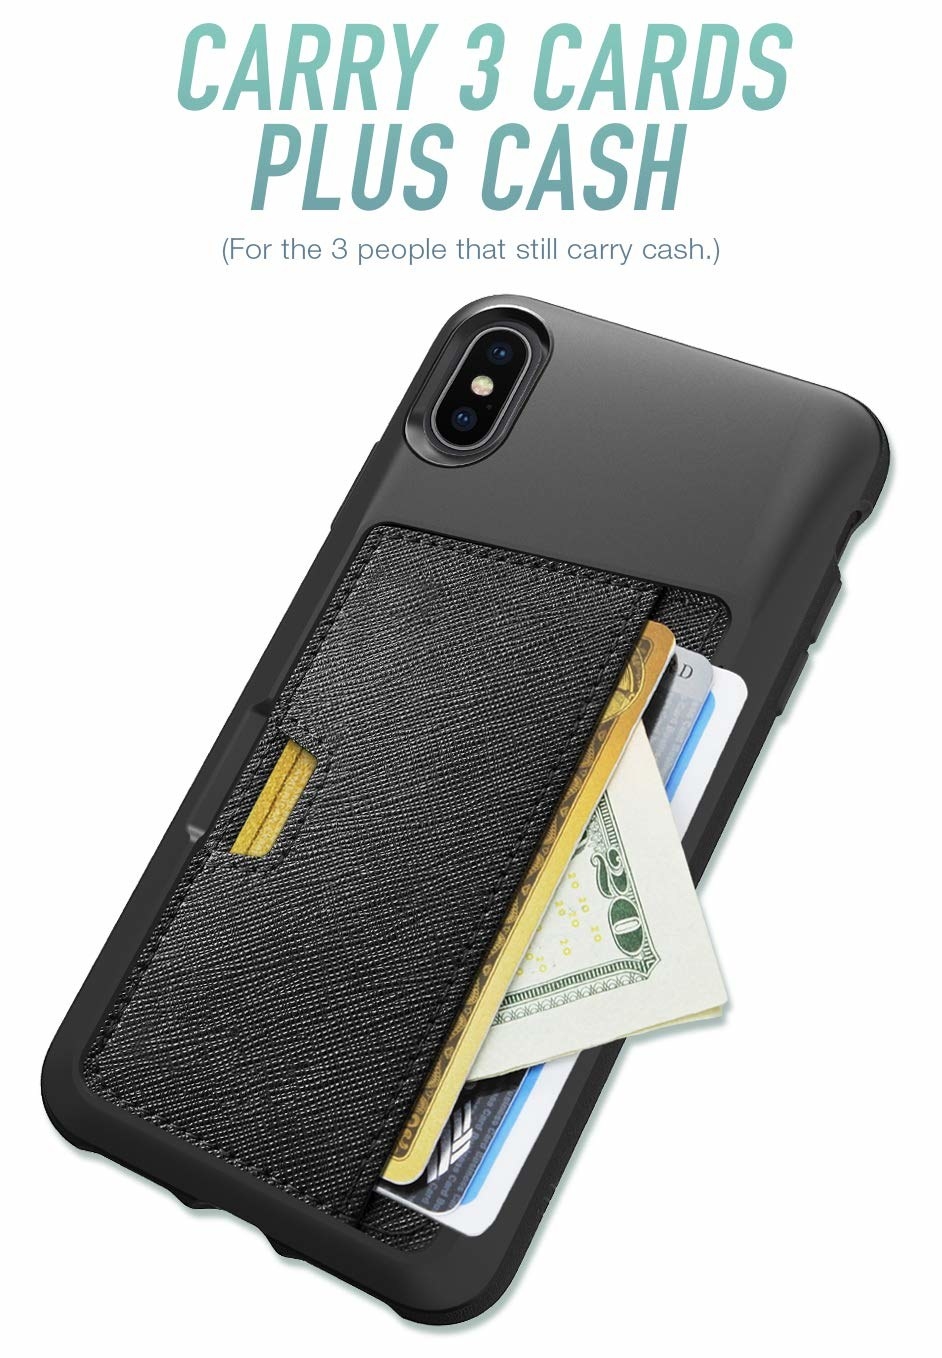 The black phone case with textured leather pocket that holds three cards plus cash